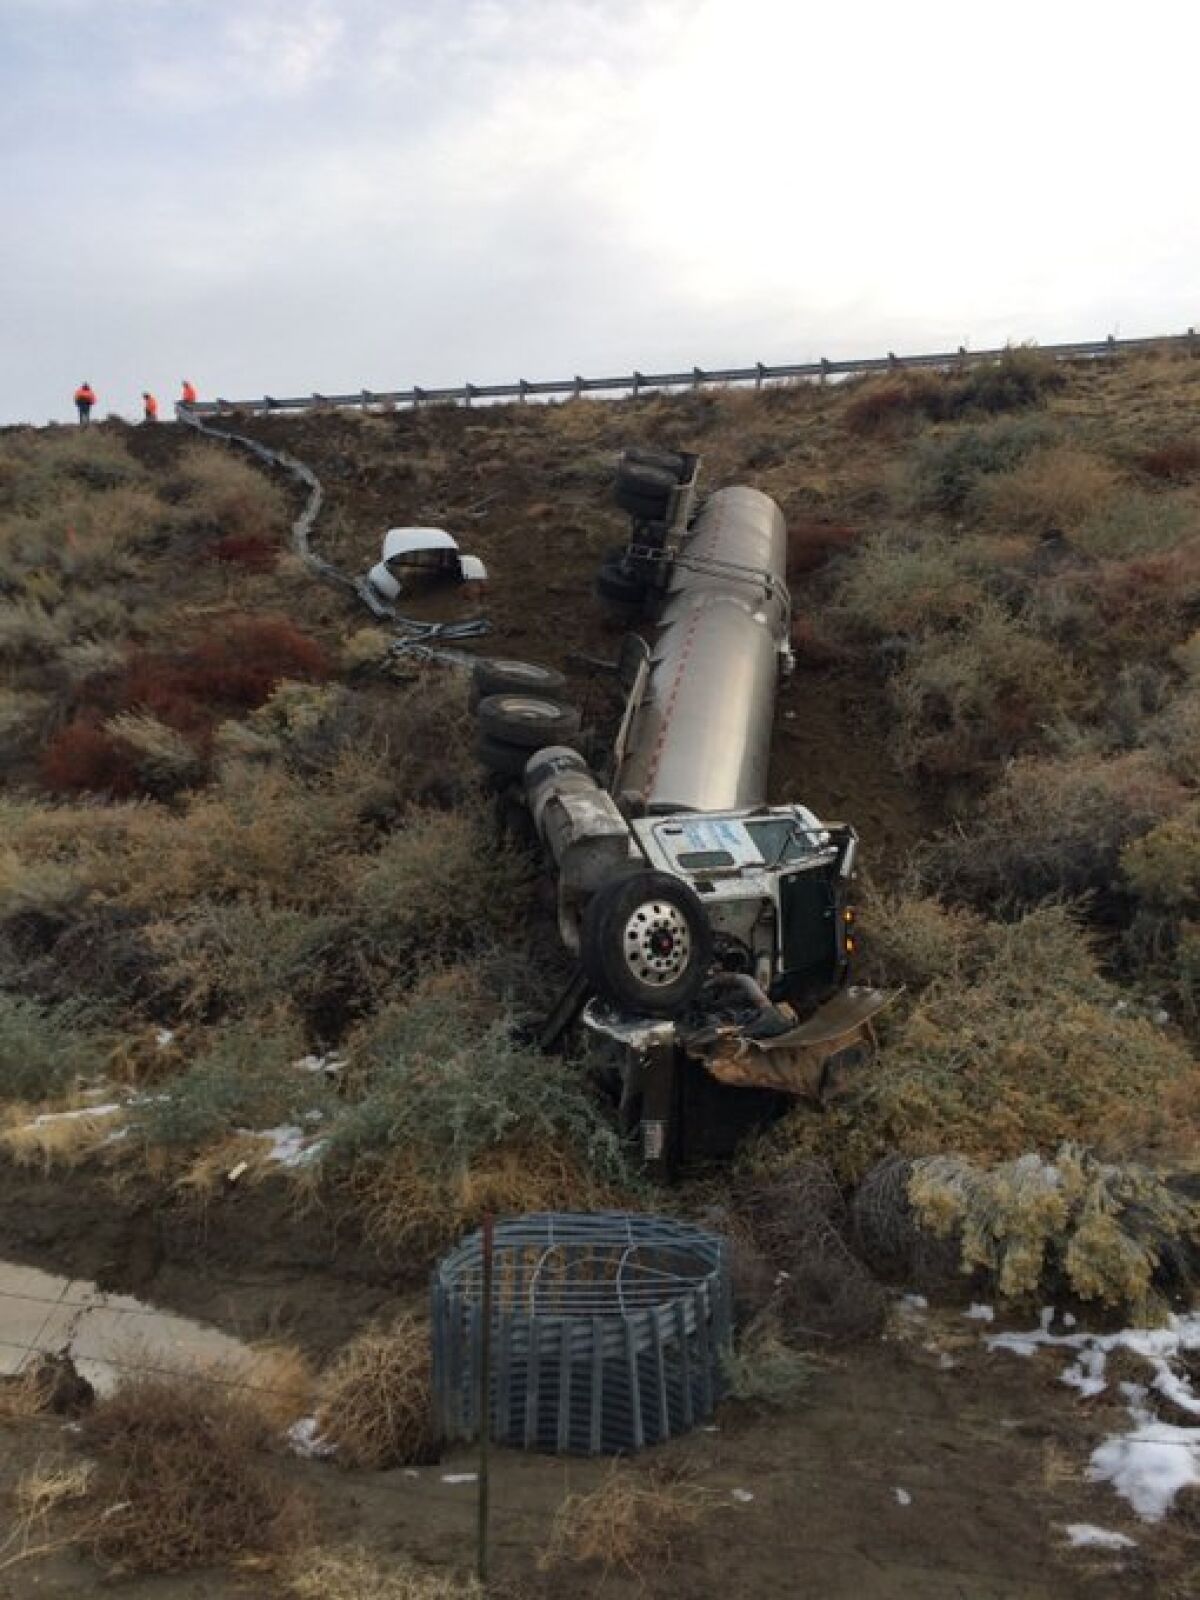 A tanker carrying condensed milk overturned Monday morning.